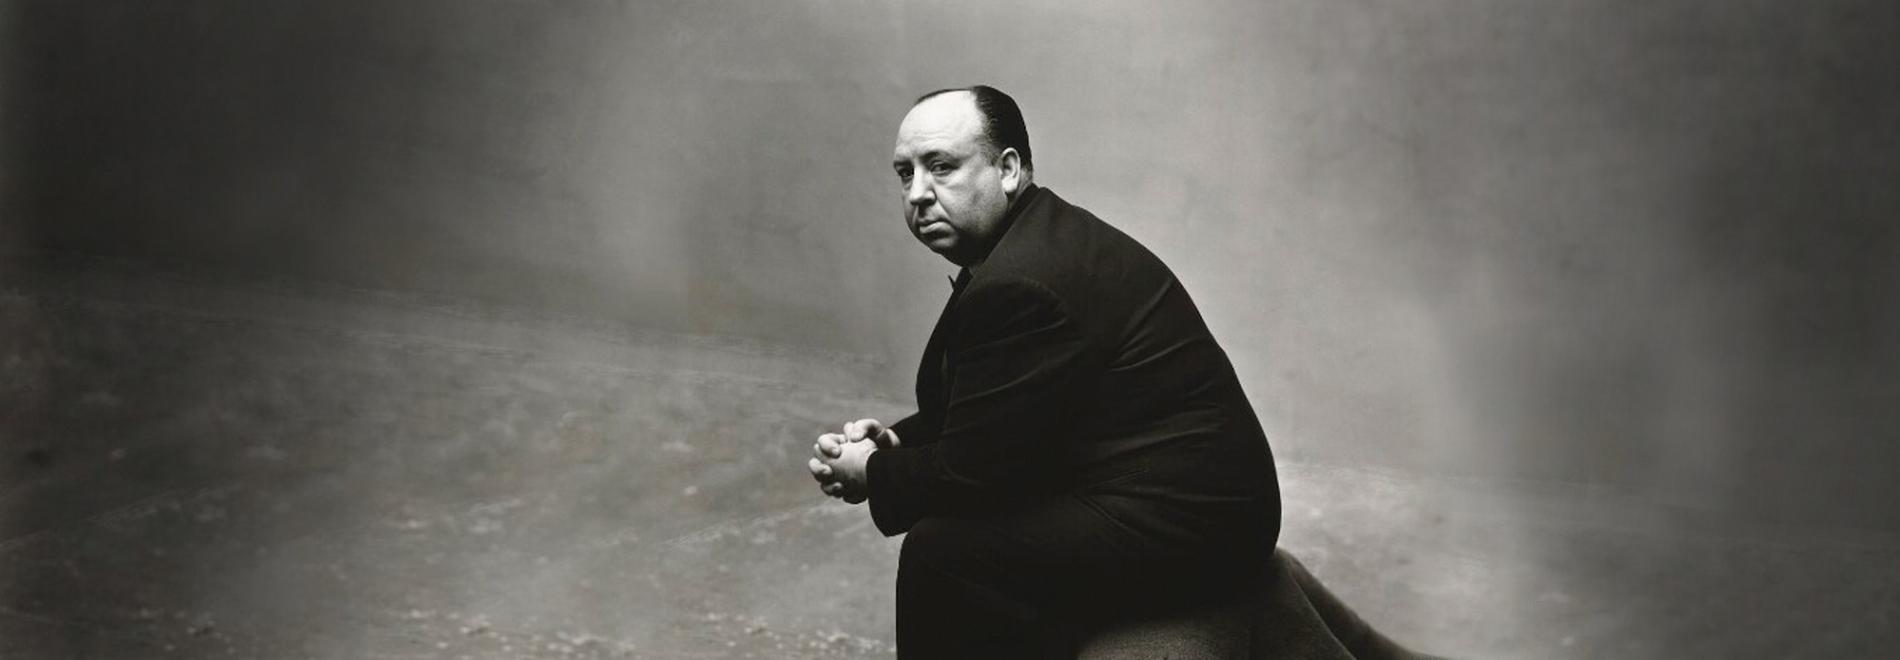 My Name Is Alfred Hitchcock 